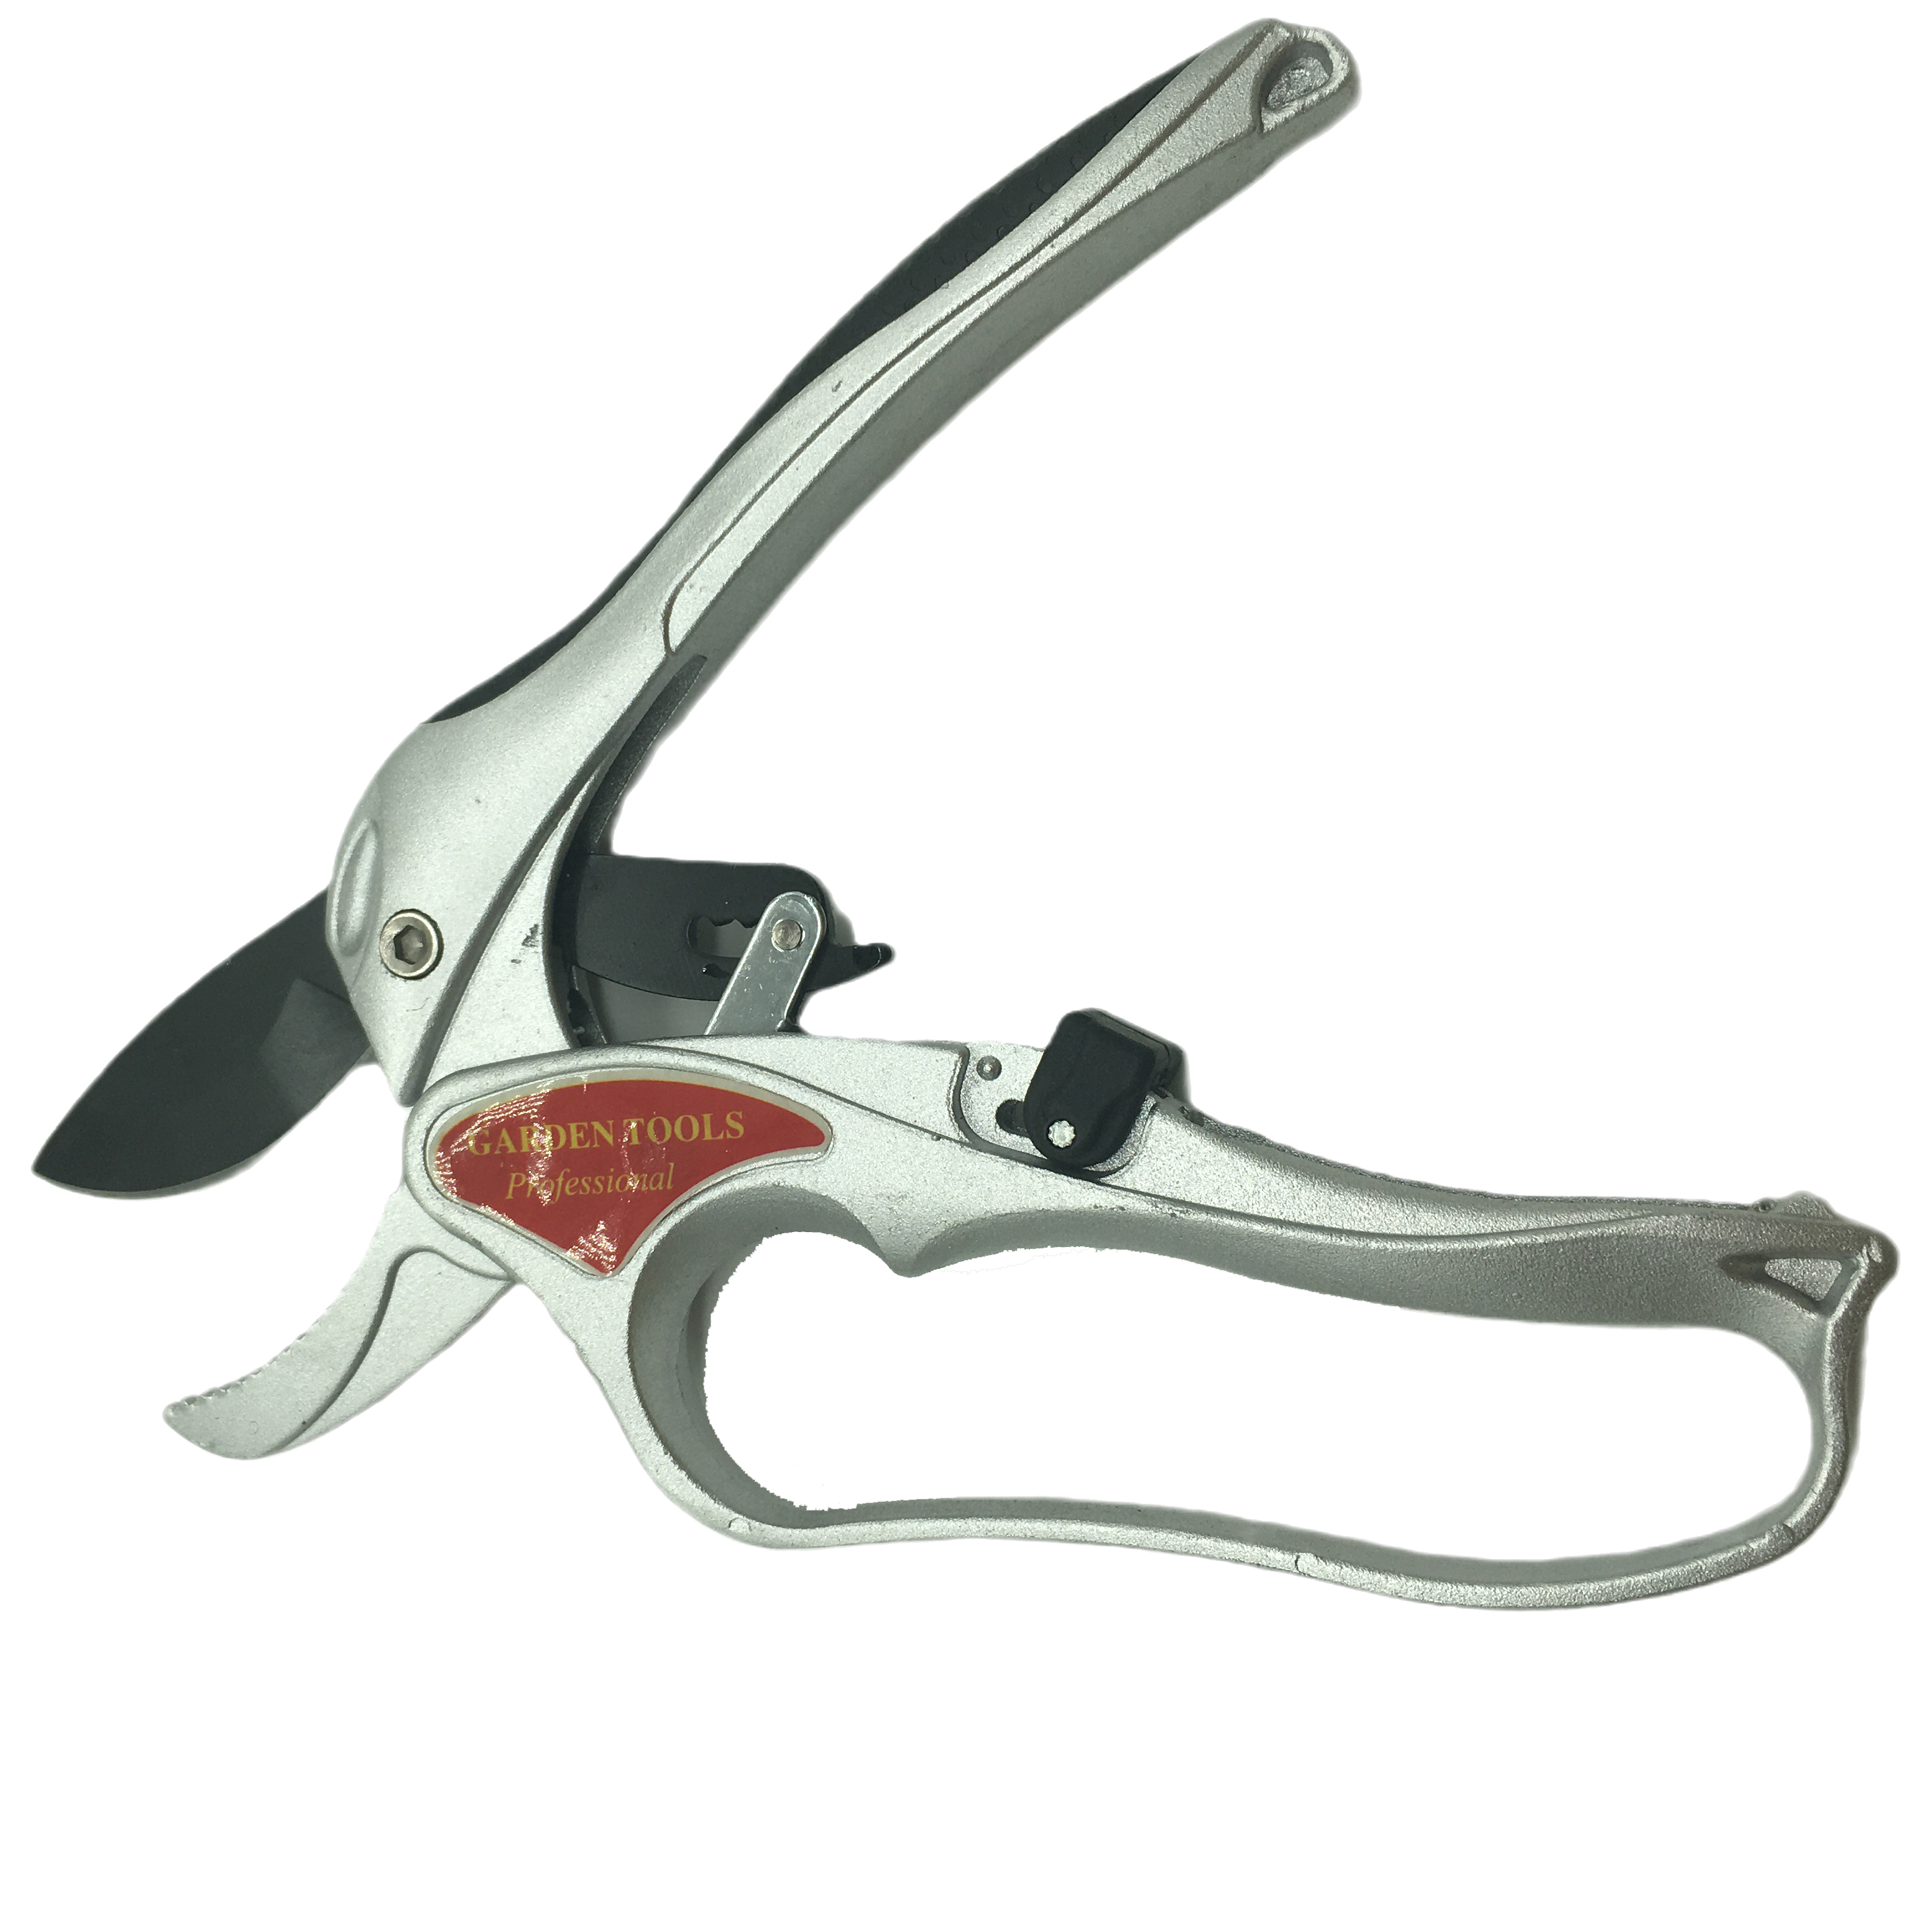 Garden Shears SK5 Blades Silver Garden Tools Labor-saving Tree Branches And Flower Branches High-carbon Steel Shears